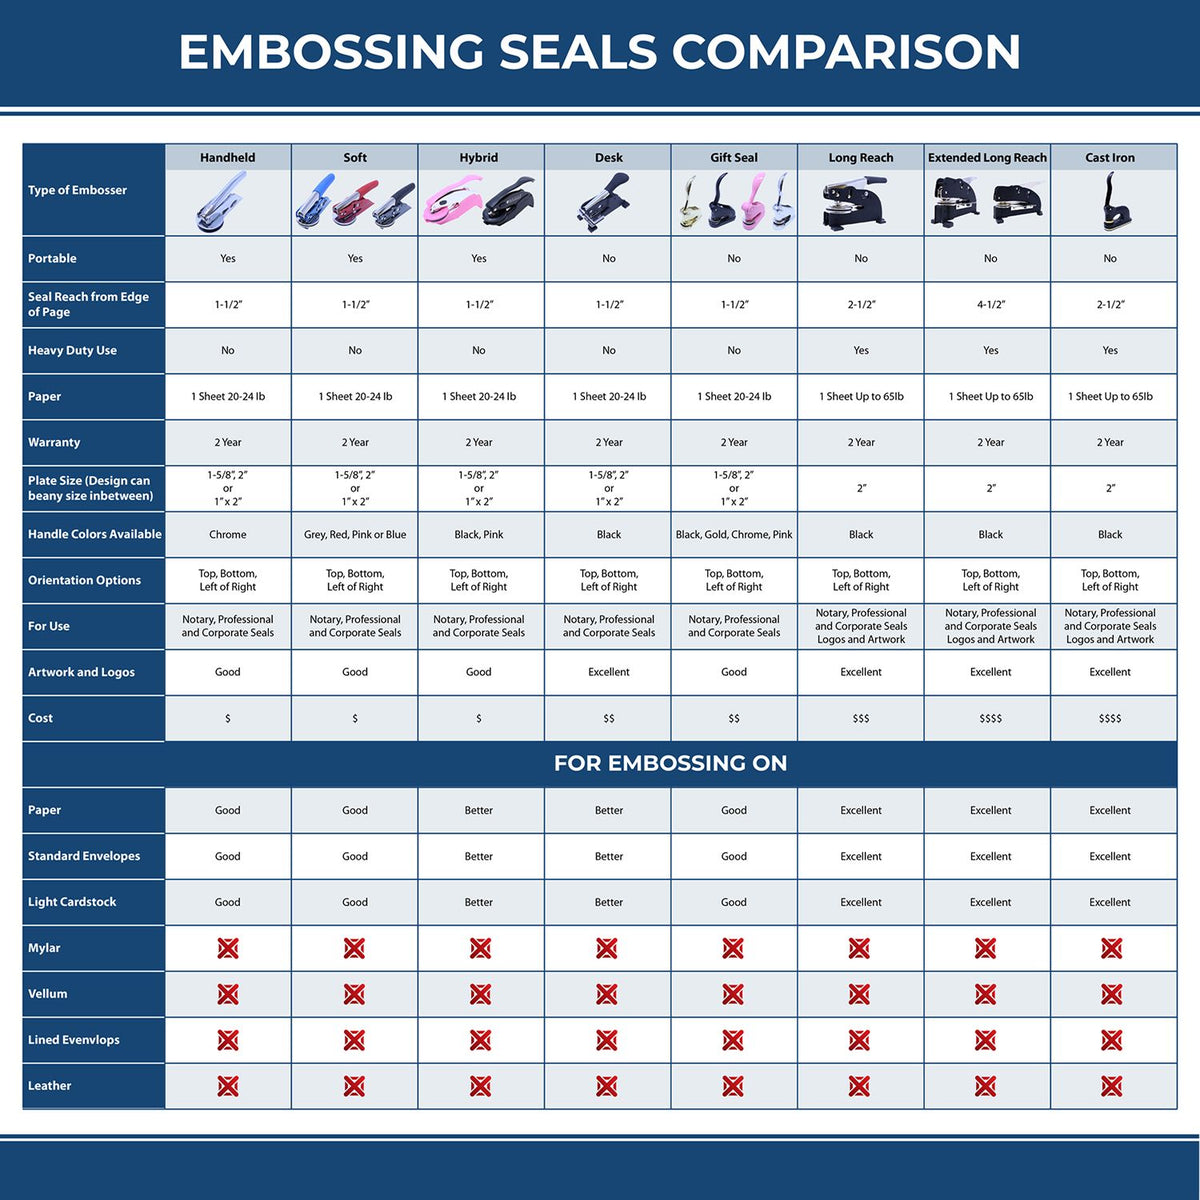 A comparison chart for the different types of mount models available for the Heavy Duty Cast Iron Idaho Architect Embosser.